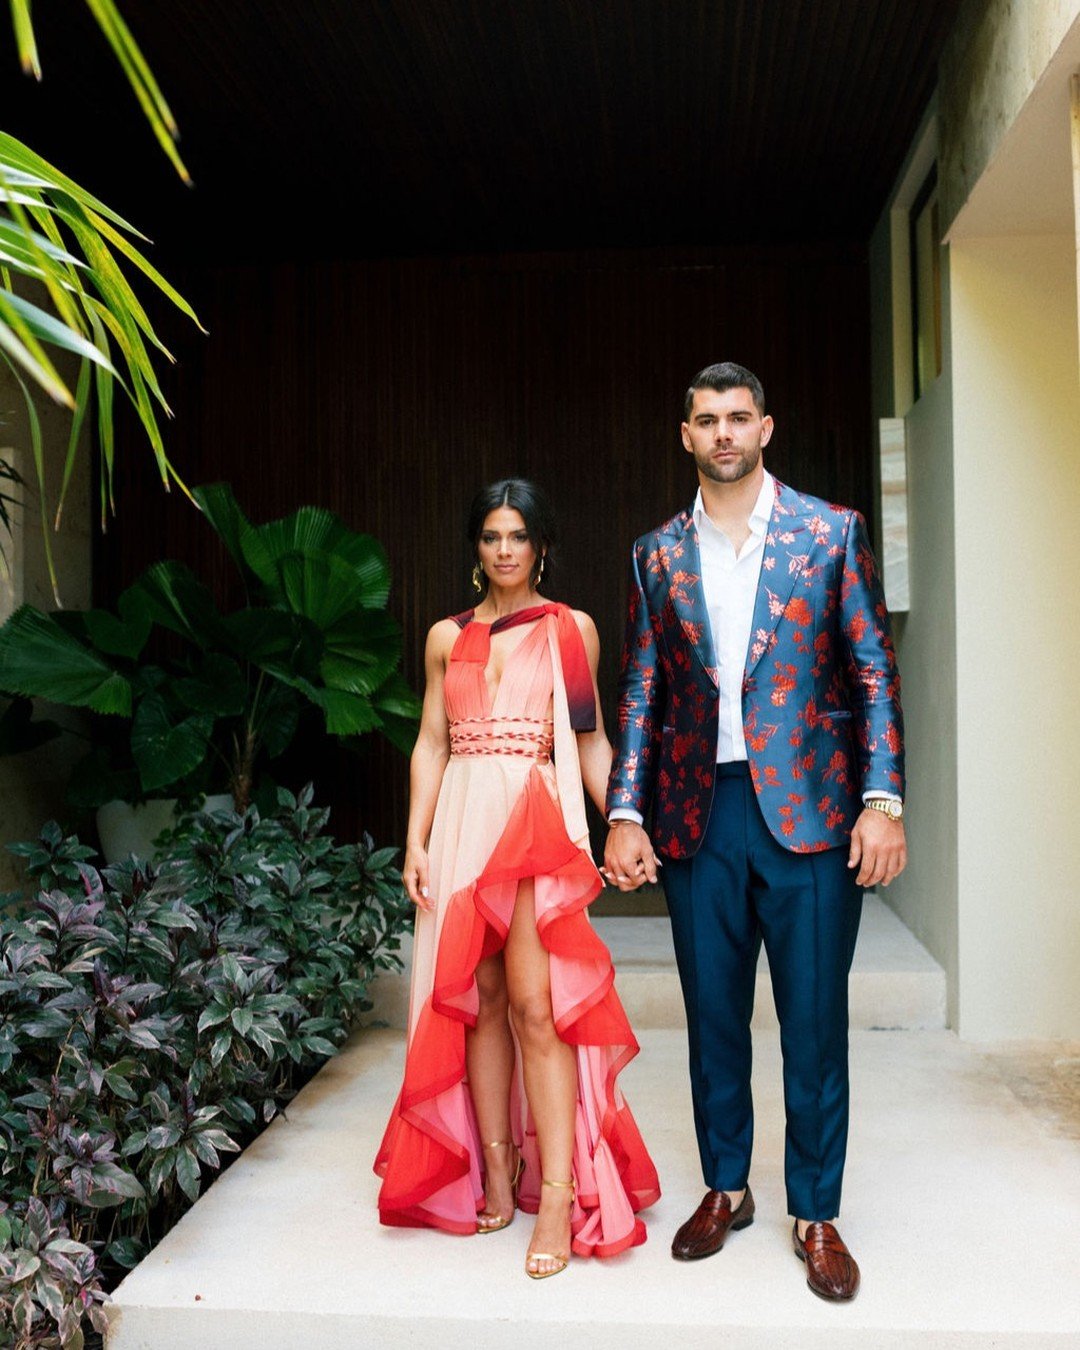 This couple opted for an all-inclusive celebration, showcasing stunning attire to break from tradition and make a statement at their weight-friendly gathering. 

Couple: @angepugh @justinpugh67 
Planner: @westgateevents @Cslundahl
Venue: @rwmayakoba
